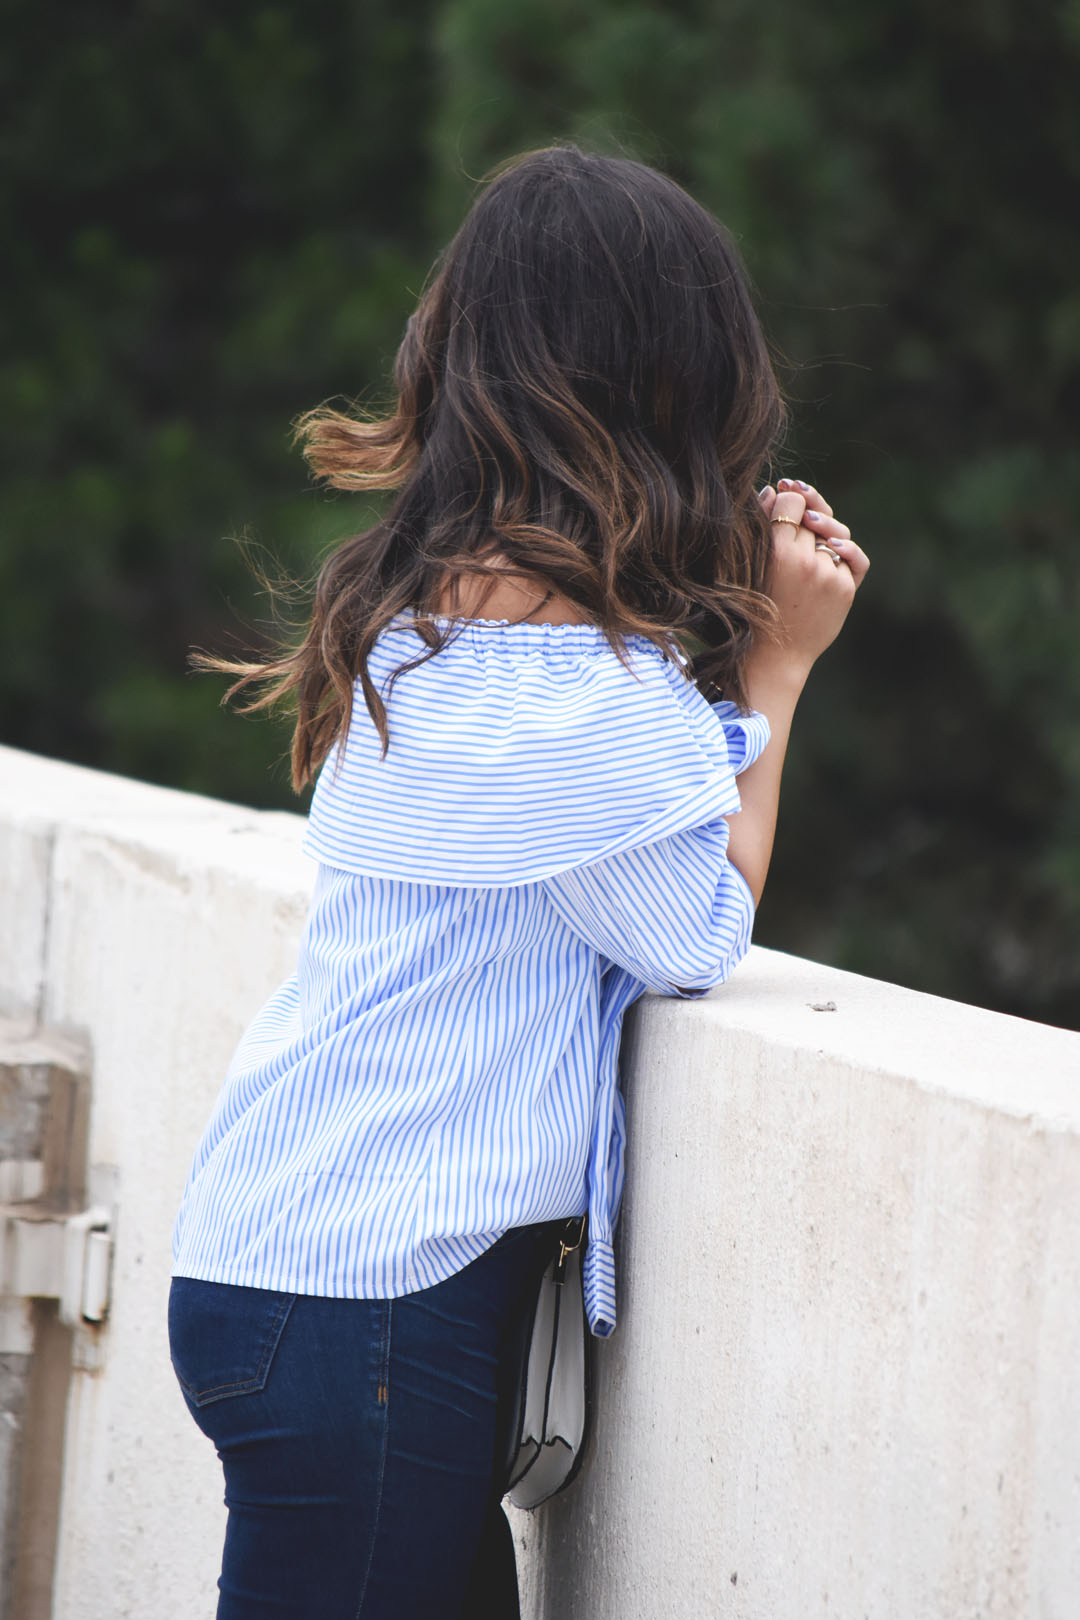 Carolina Hella of Chic Talk wearing an SheInside off the shoulder blue striped top and Madewell jeans